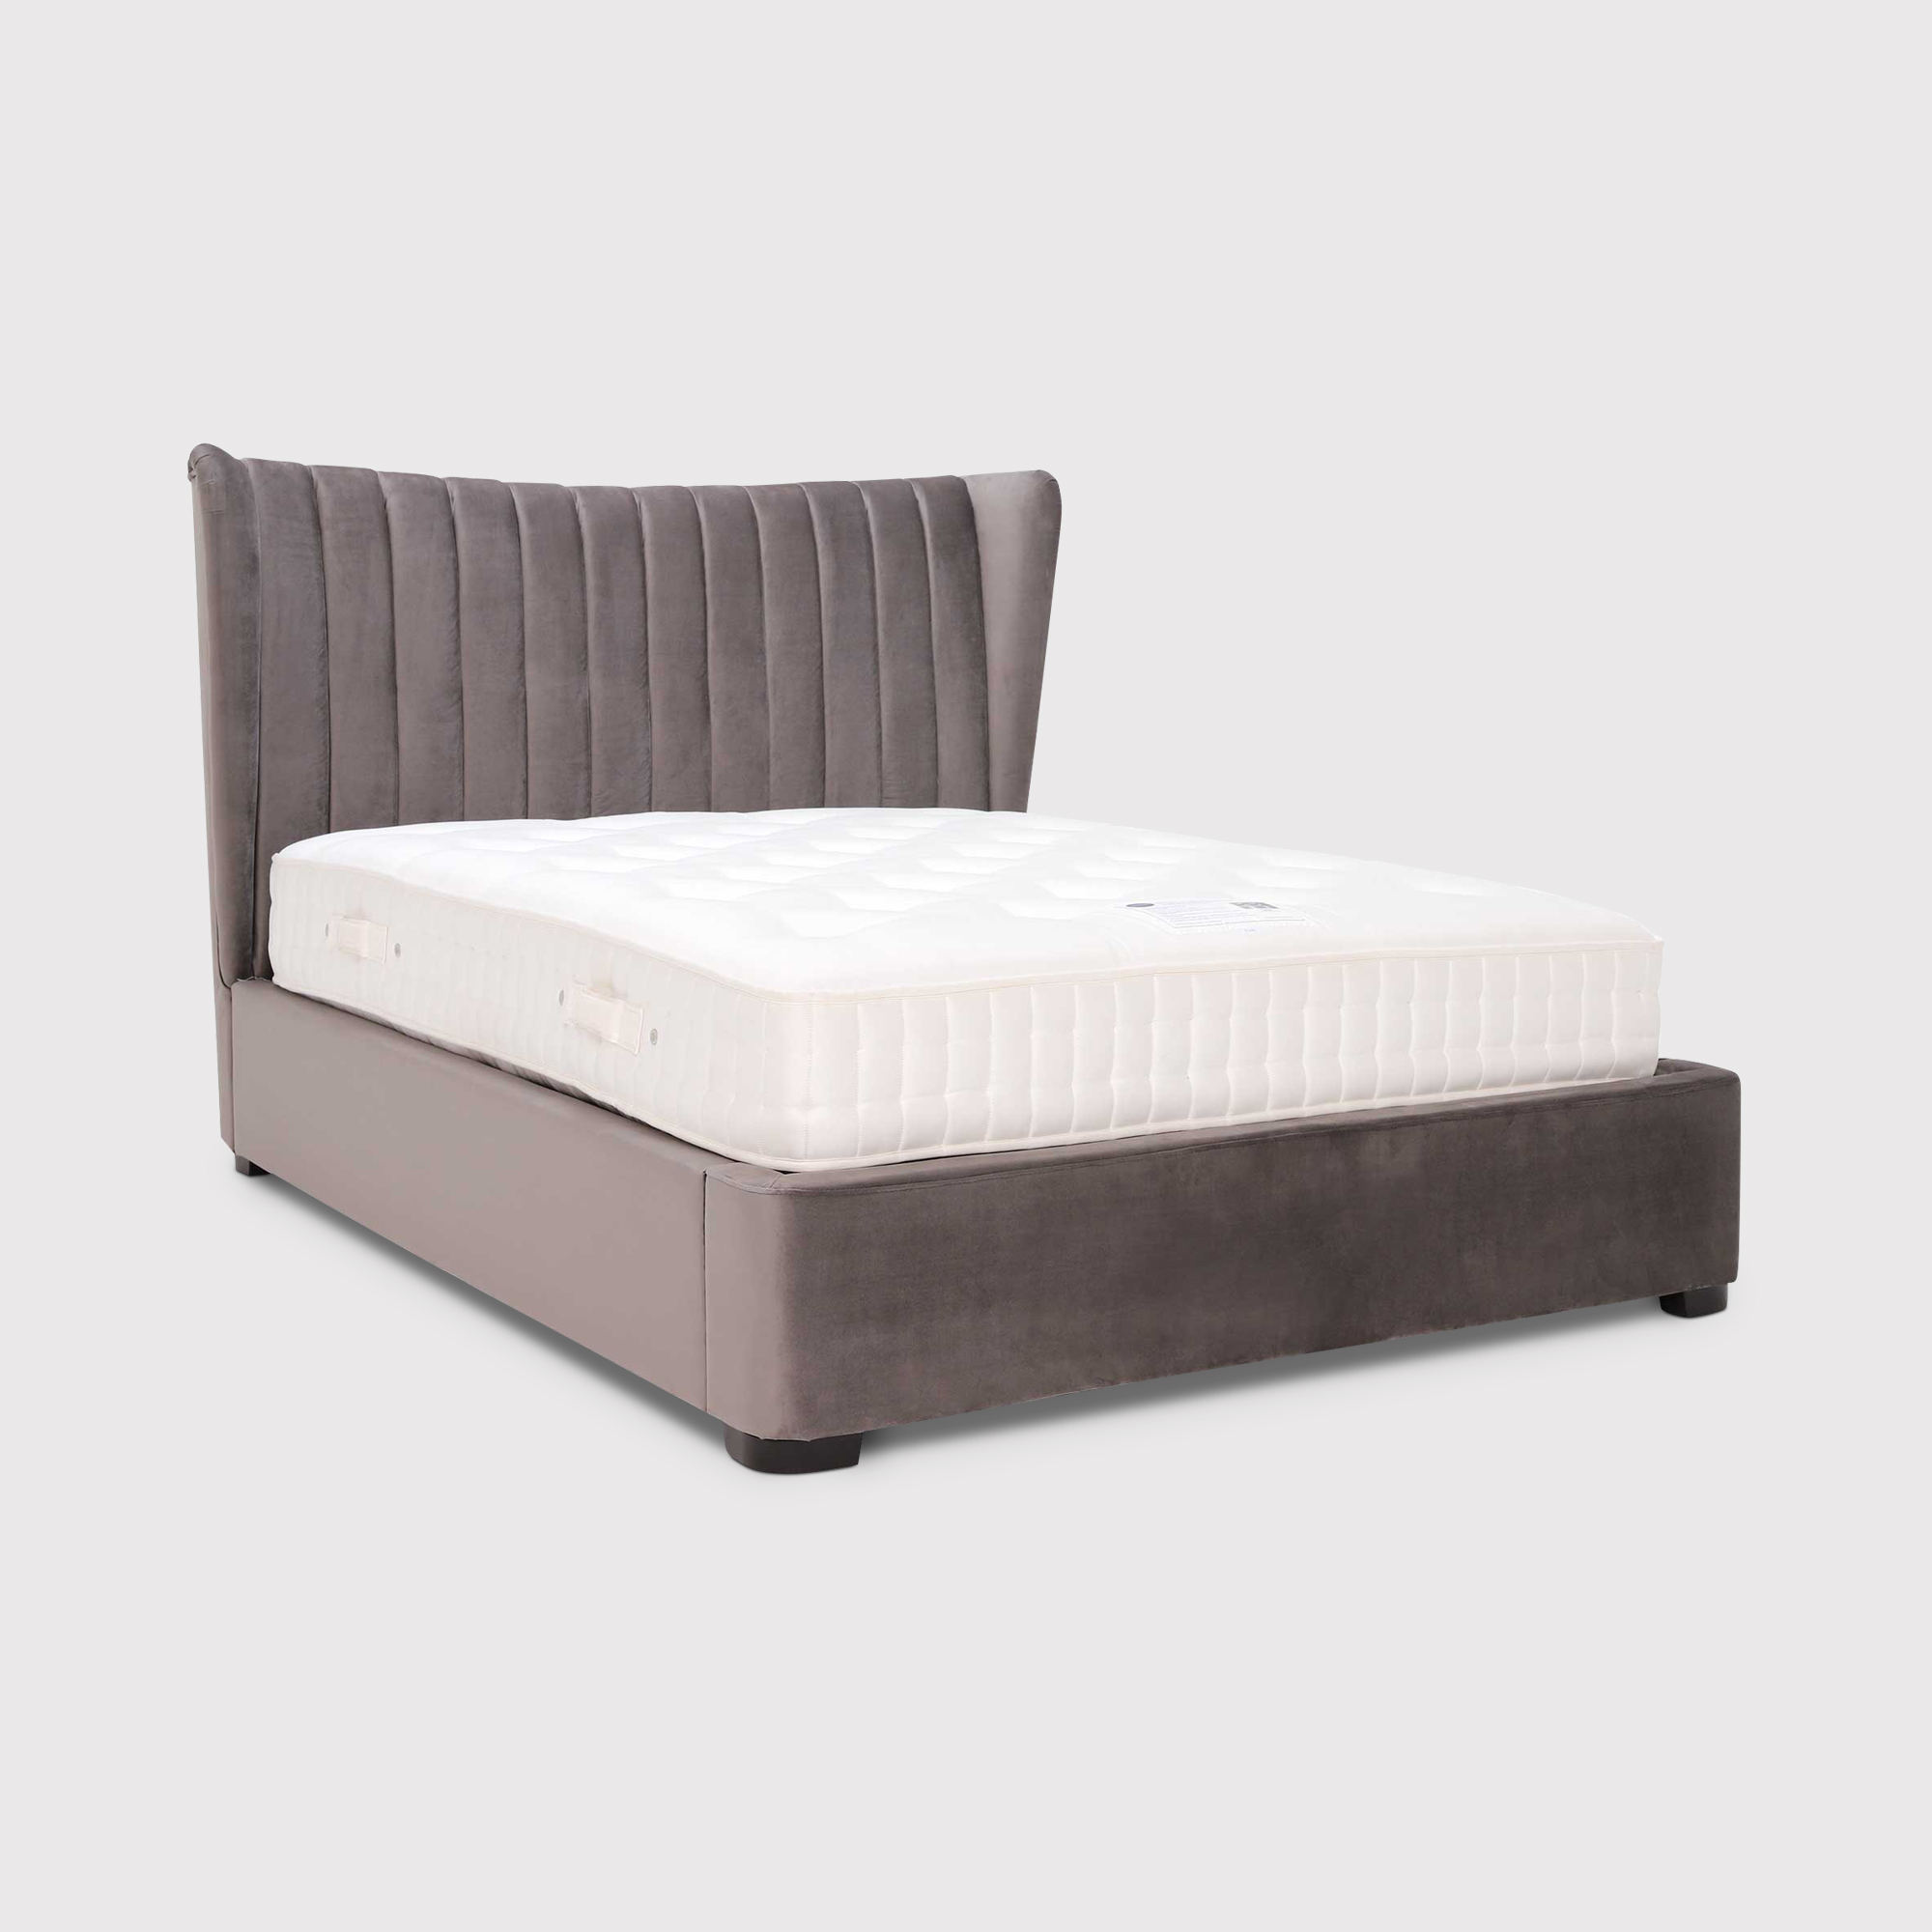 Cordette 180cm Bed With Lift Up, Grey | Super King | Barker & Stonehouse